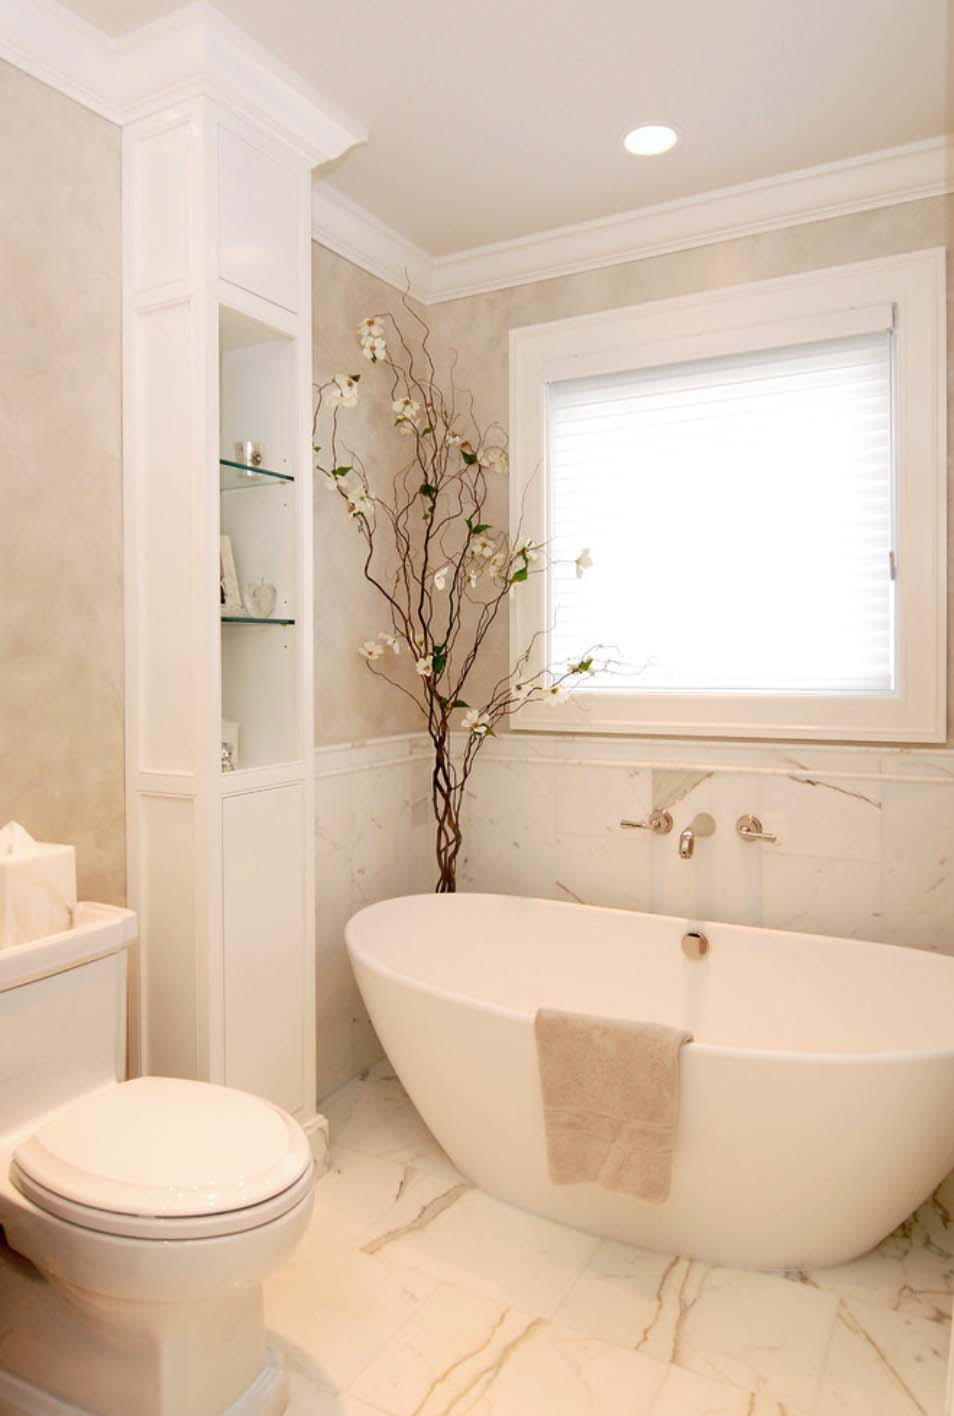 Freestanding Tub In Small Bathroom
 38 Amazing freestanding tubs for a bathroom spa sanctuary